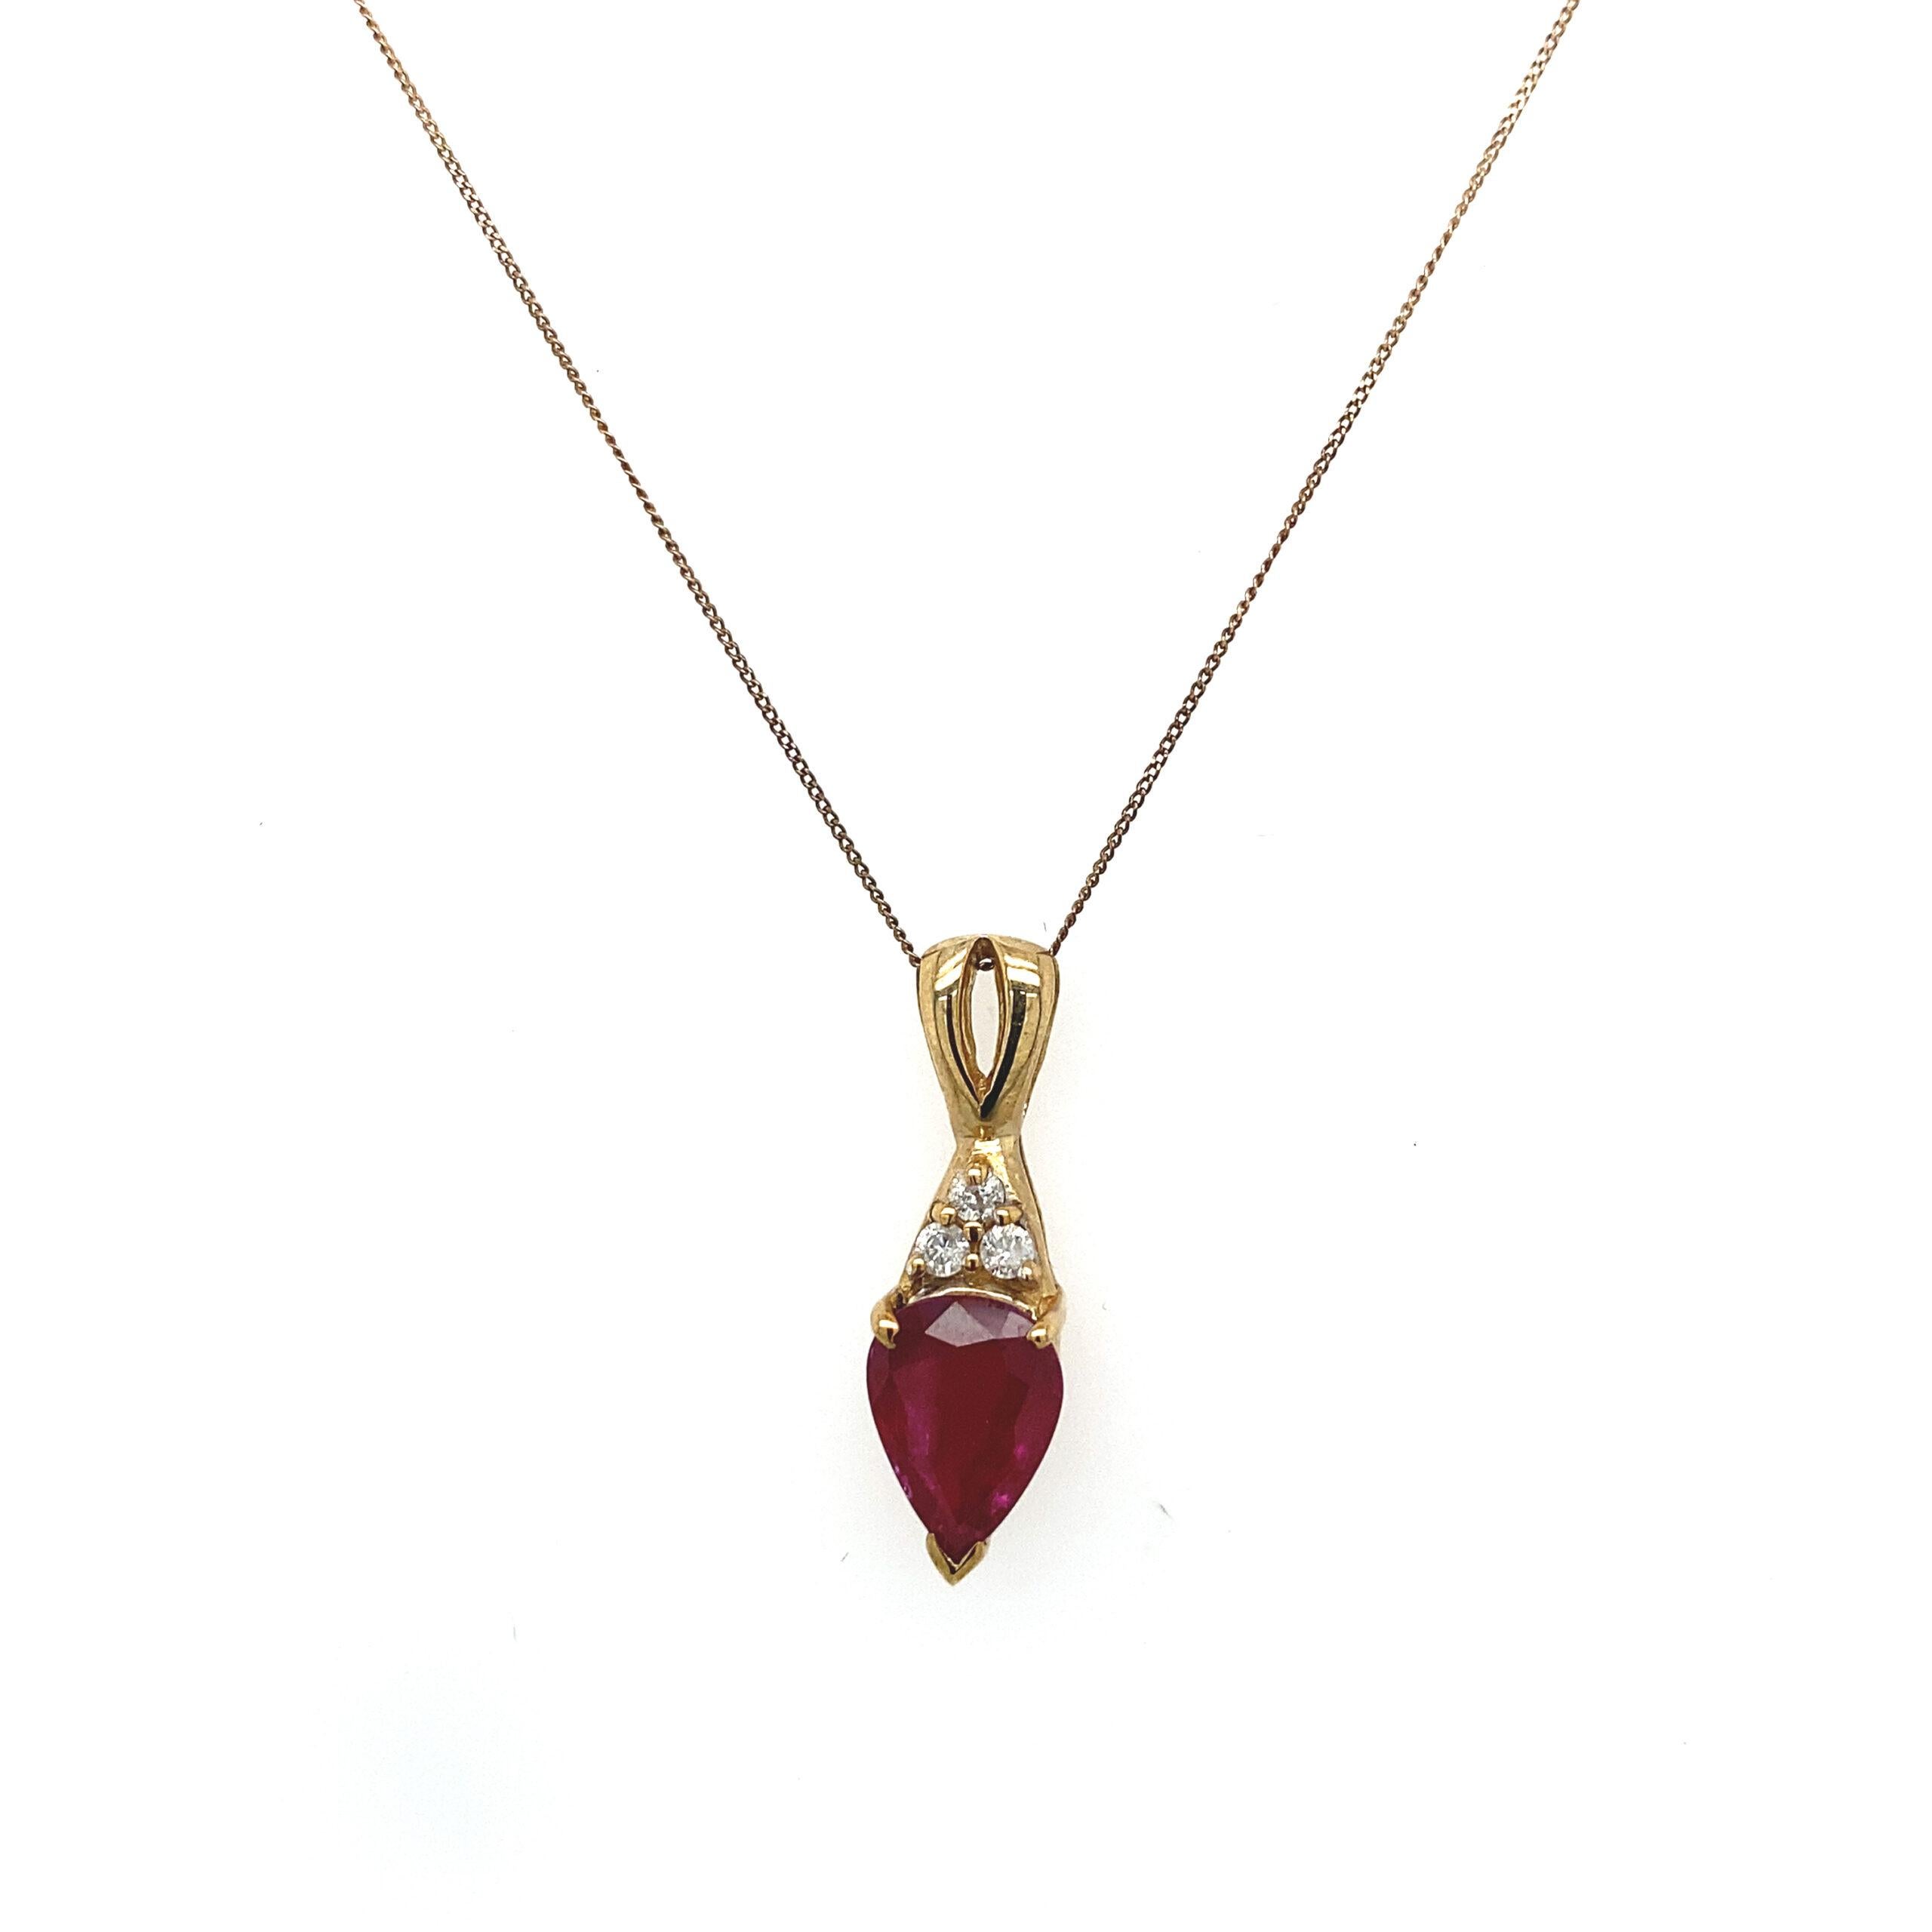 1.50ct Pear Shape Ruby, with 3 Round Brilliant Cut Diamonds on 16/18” 9ct Chain

Additional Information:
Total Diamond Weight: 0.07ct
Diamond Colour: G/H
Diamond Clarity: Si
Total Weight: 3g
Pendant Size: Length 23mm x Width 7mm
SMS4547